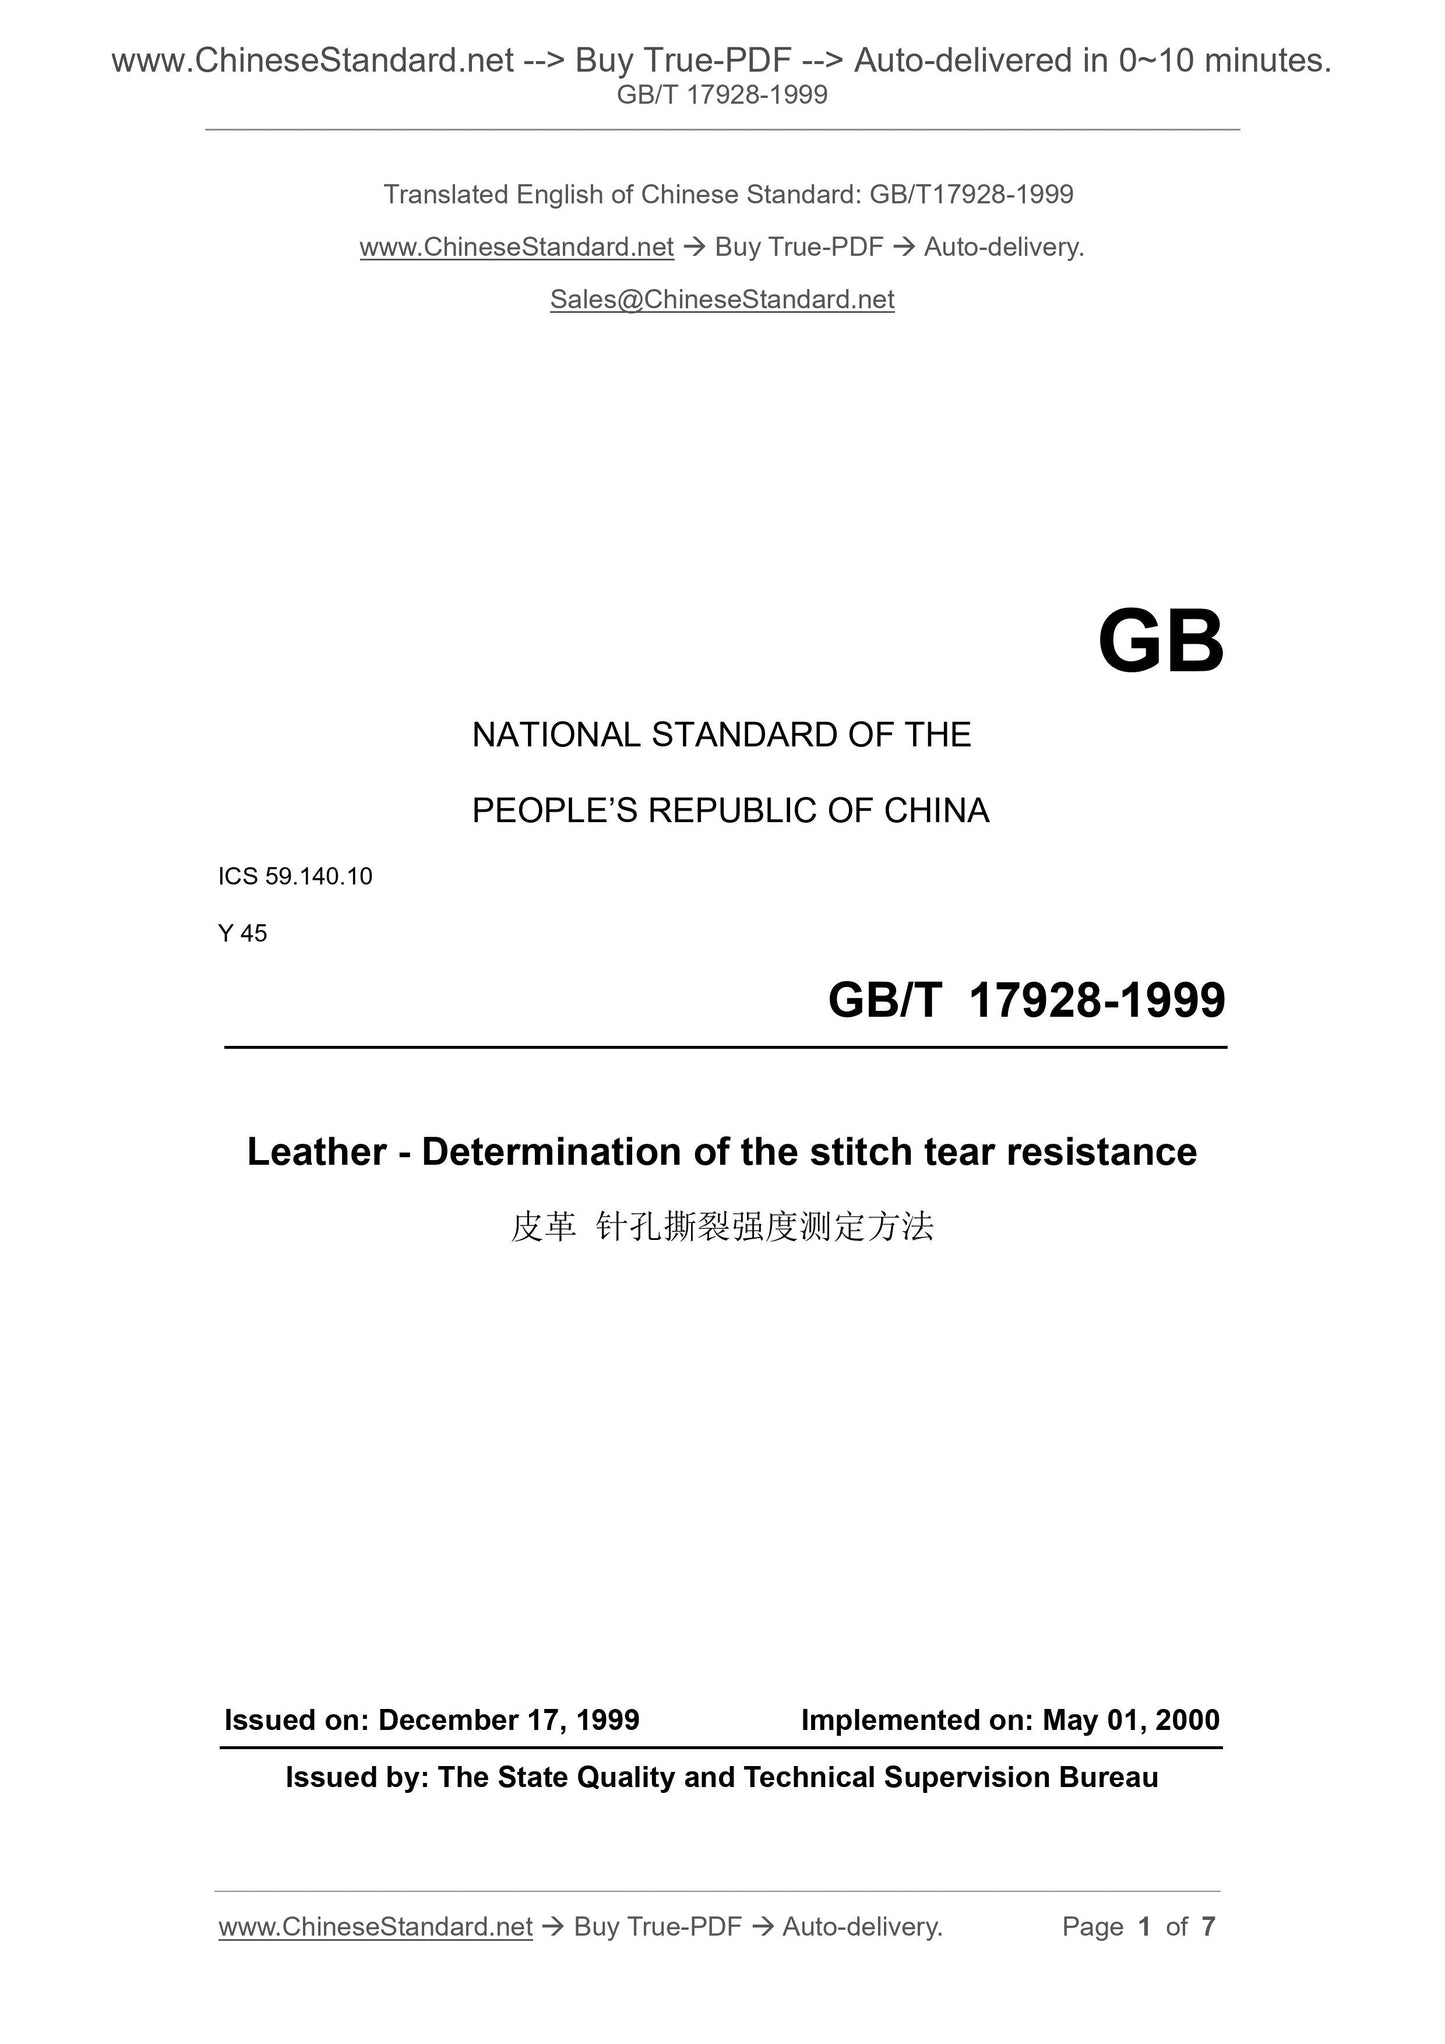 GB/T 17928-1999 Page 1